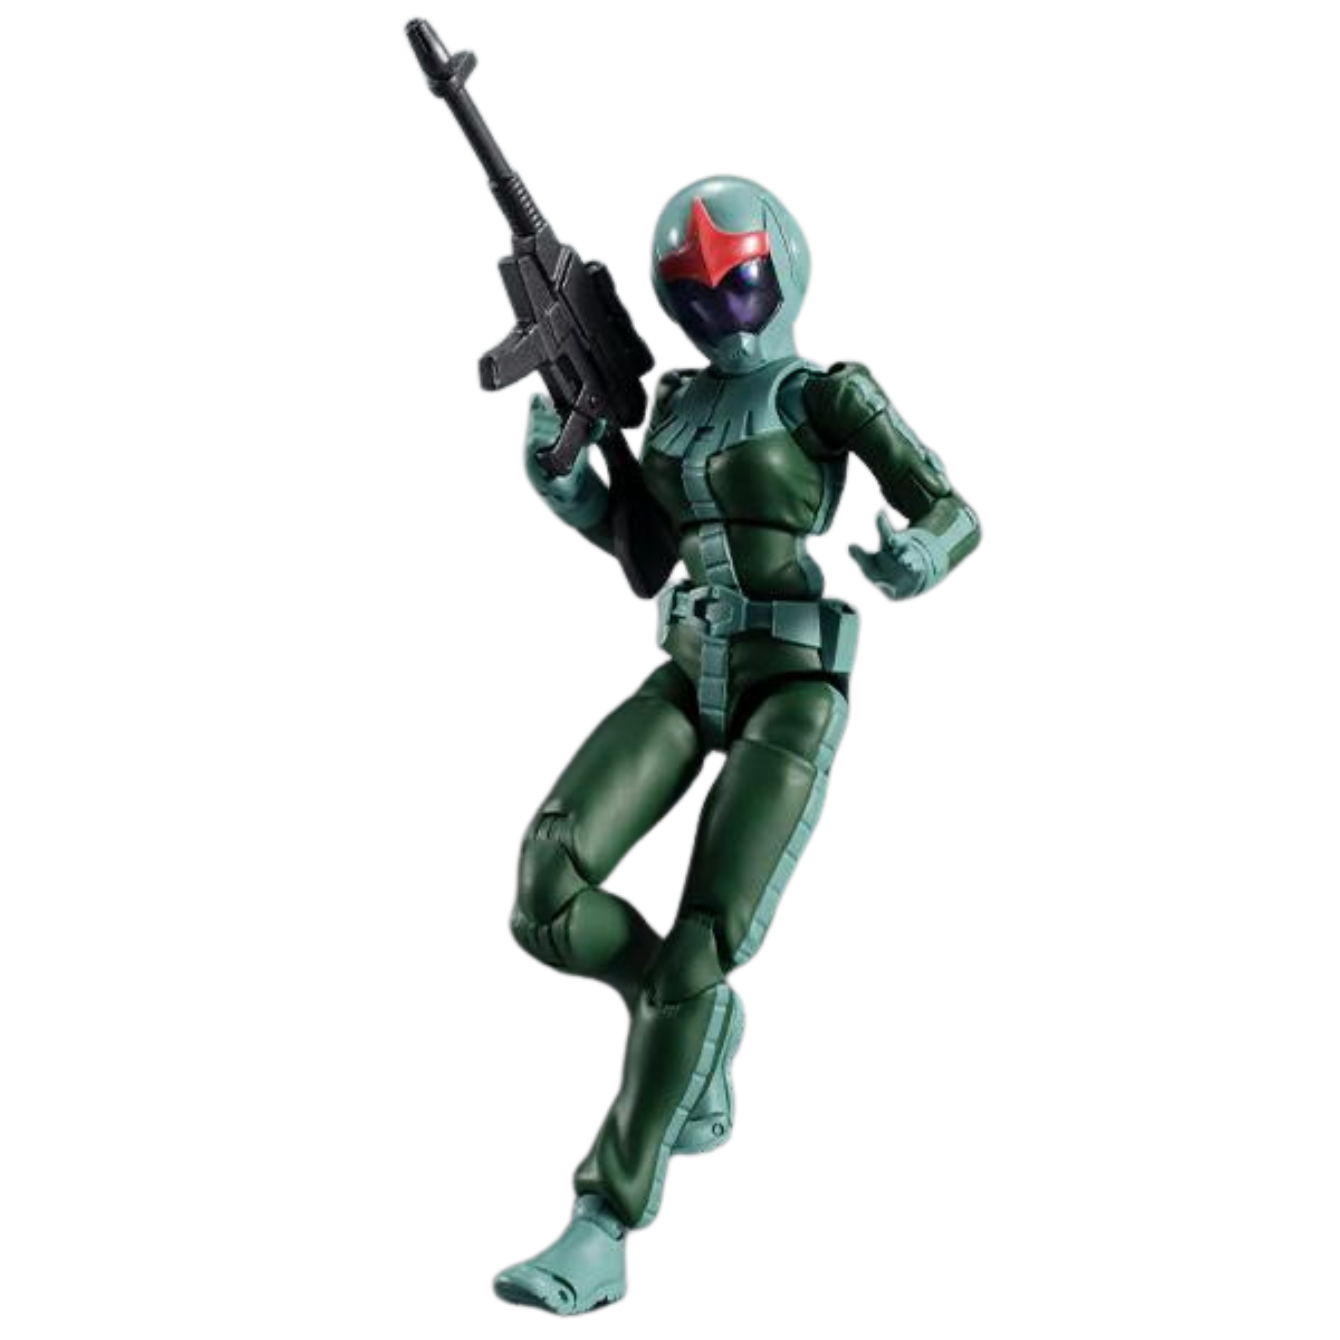 Gundam Megahouse G.M.G Prinicipality of Zeon Army Soldier 05